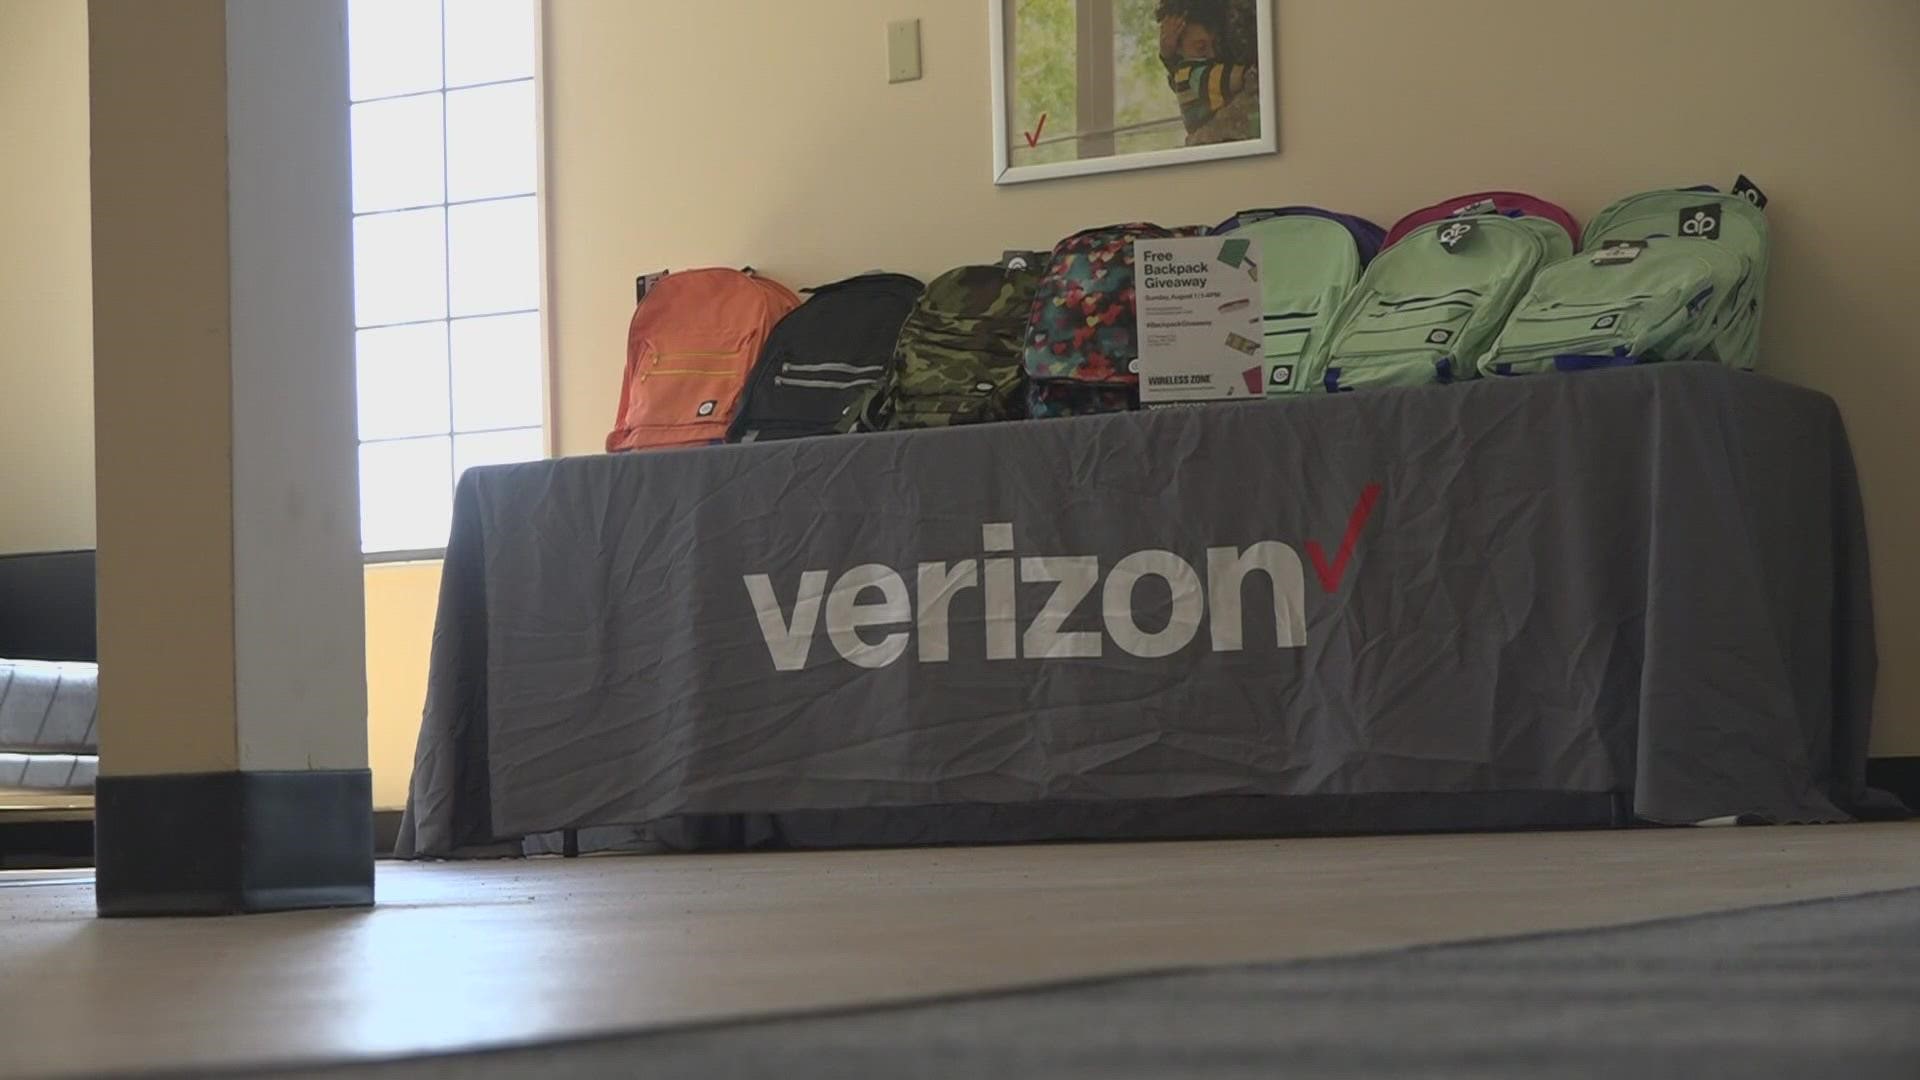 Some Verizon Wireless Zones throughout Maine will give backpacks and supplies on a first-come-first-serve basis on Sunday, August 1st.